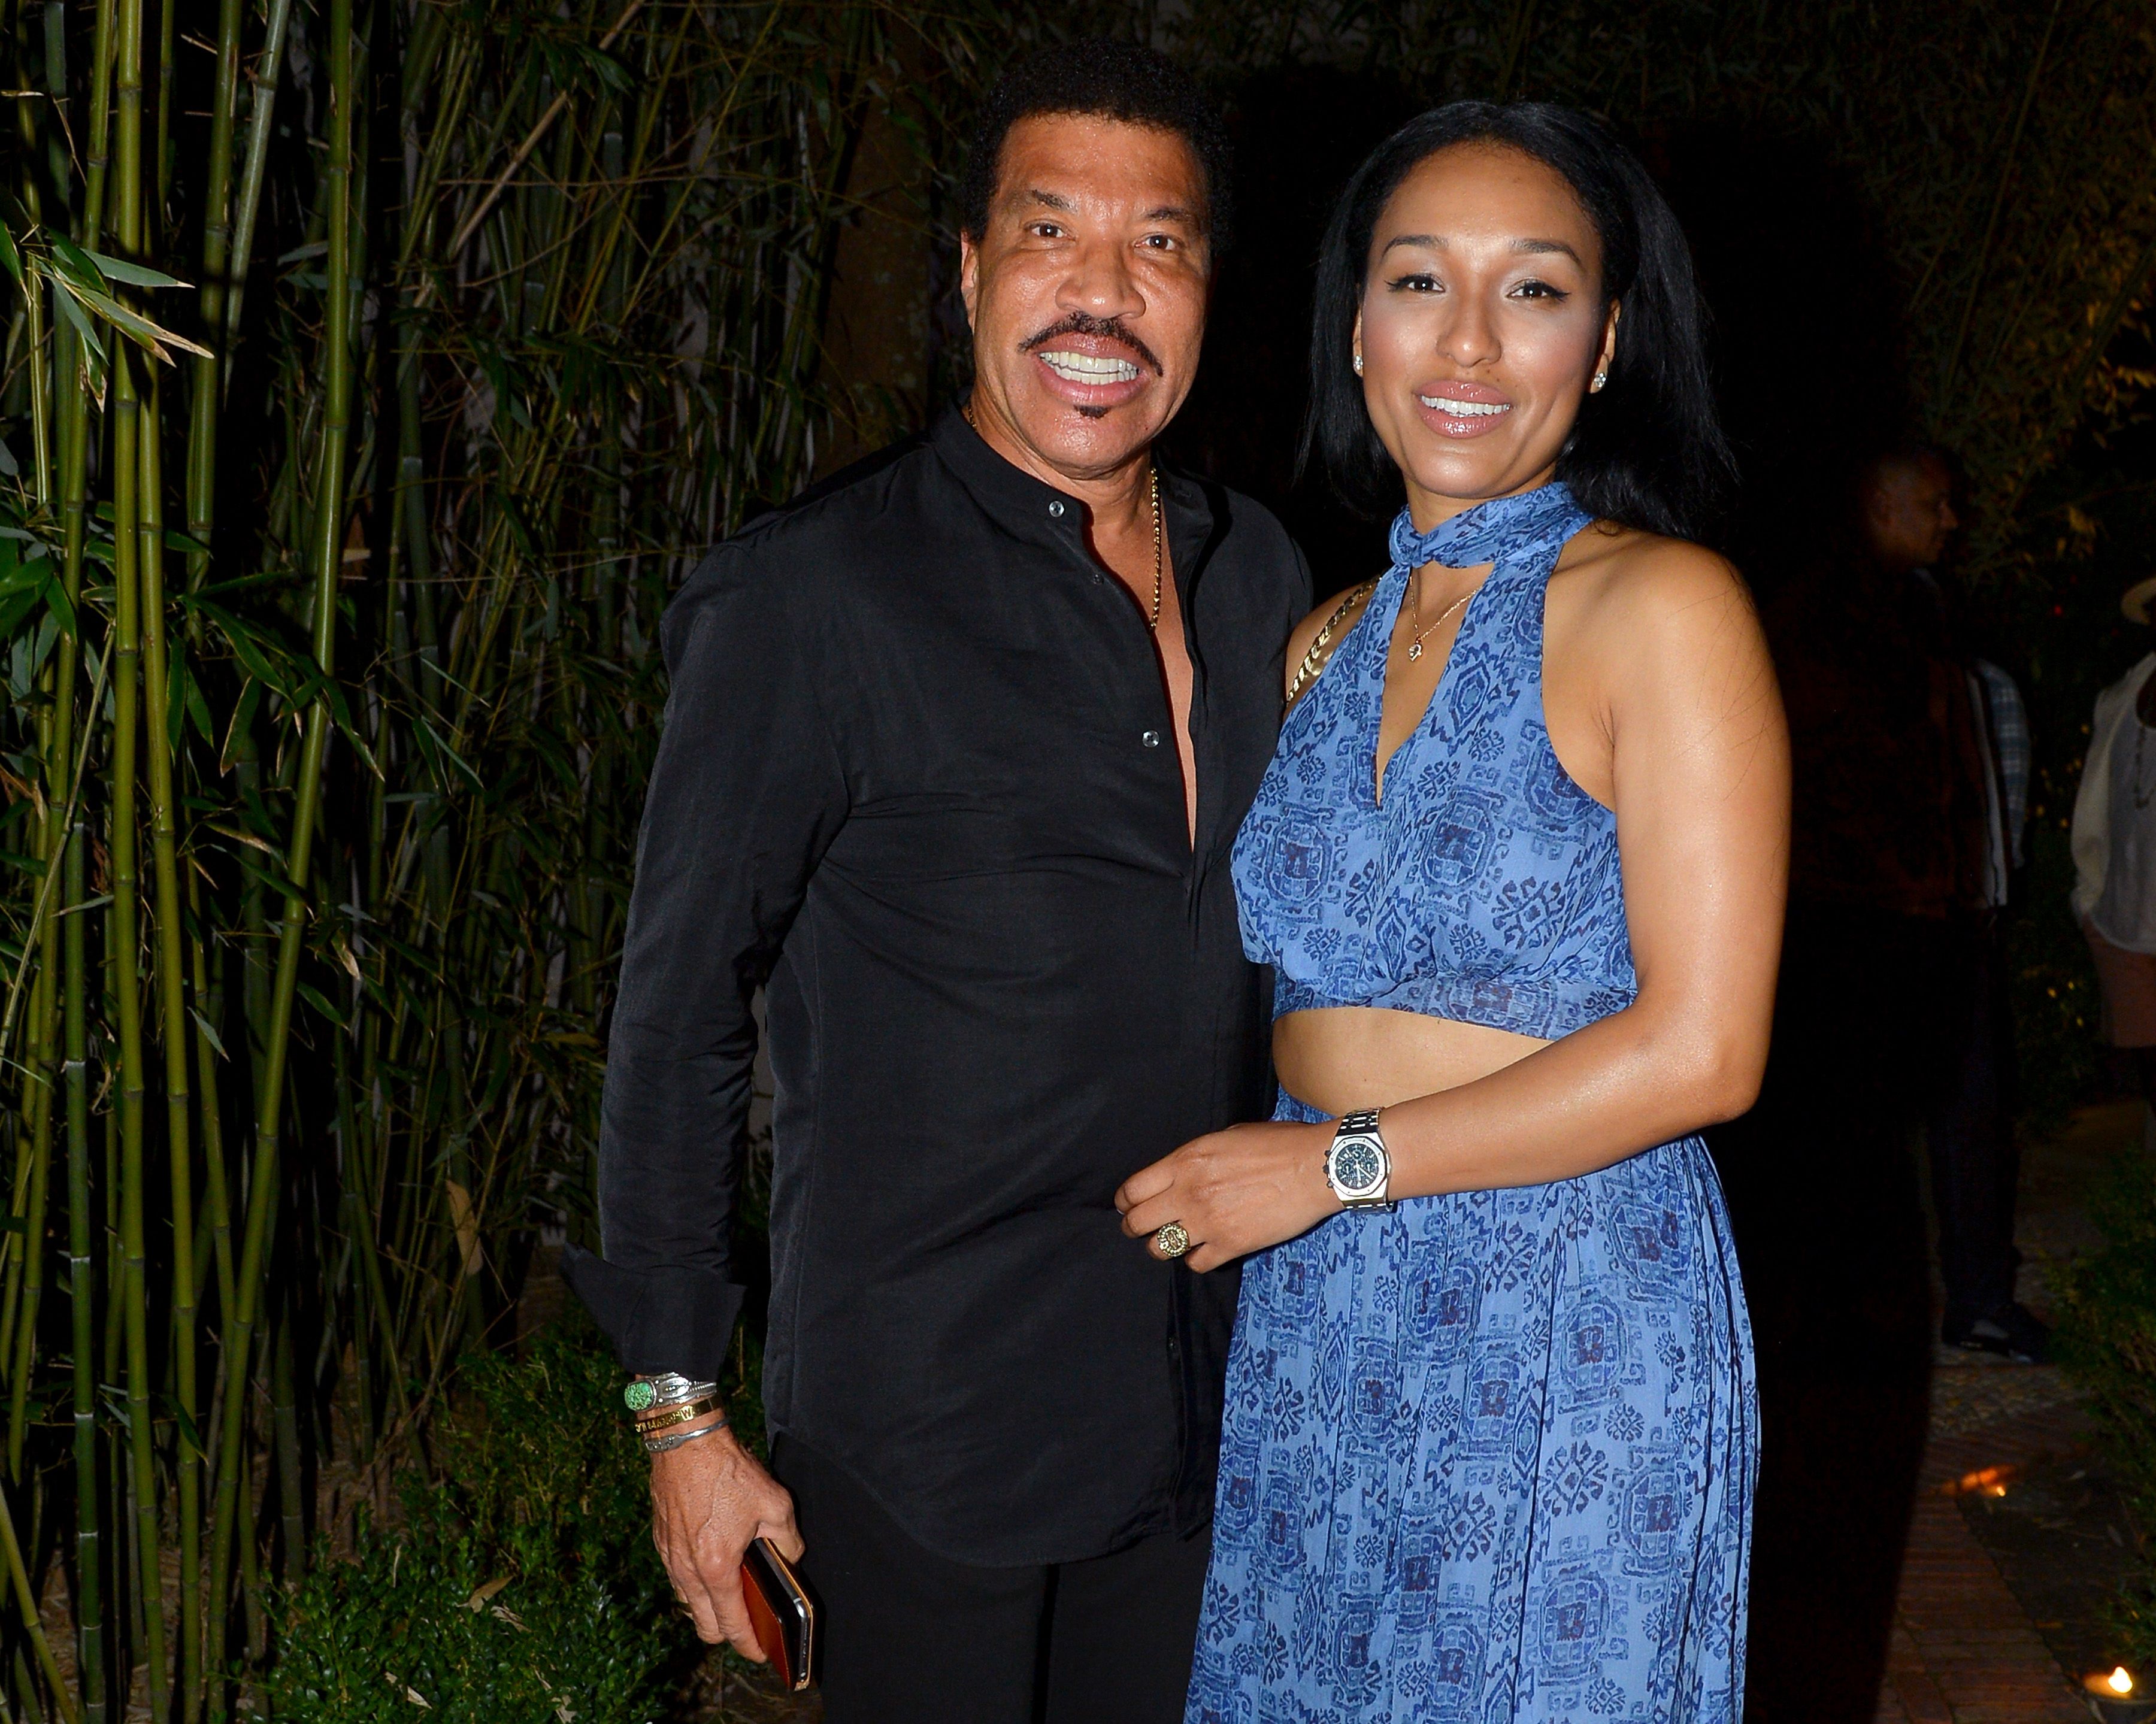 Lionel Richie and Lisa Parigi attend the Apollo in the Hamptons 2016 party at The Creeks on August 20, 2016 in East Hampton, New York. | Source: Getty Images